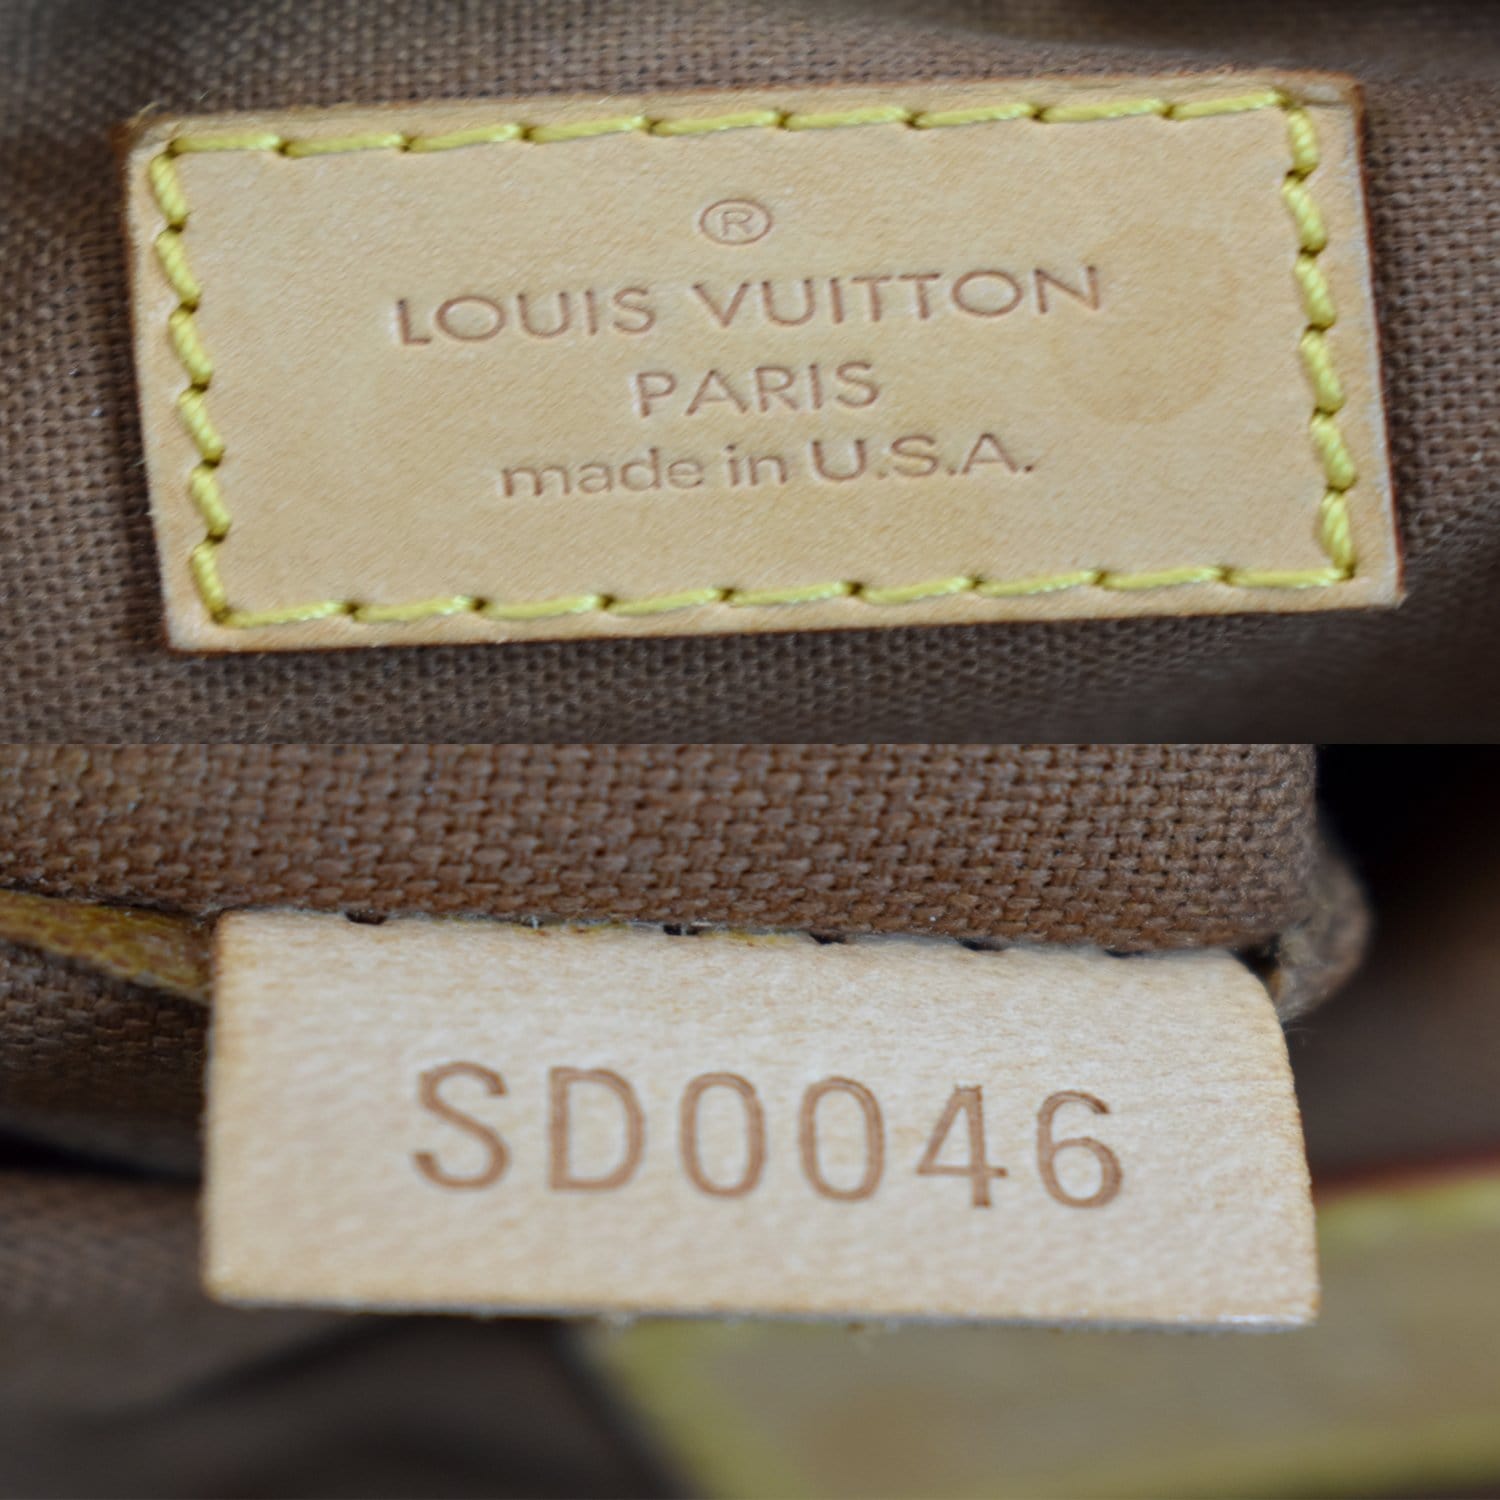 Tulum leather handbag Louis Vuitton Brown in Leather - 20320067